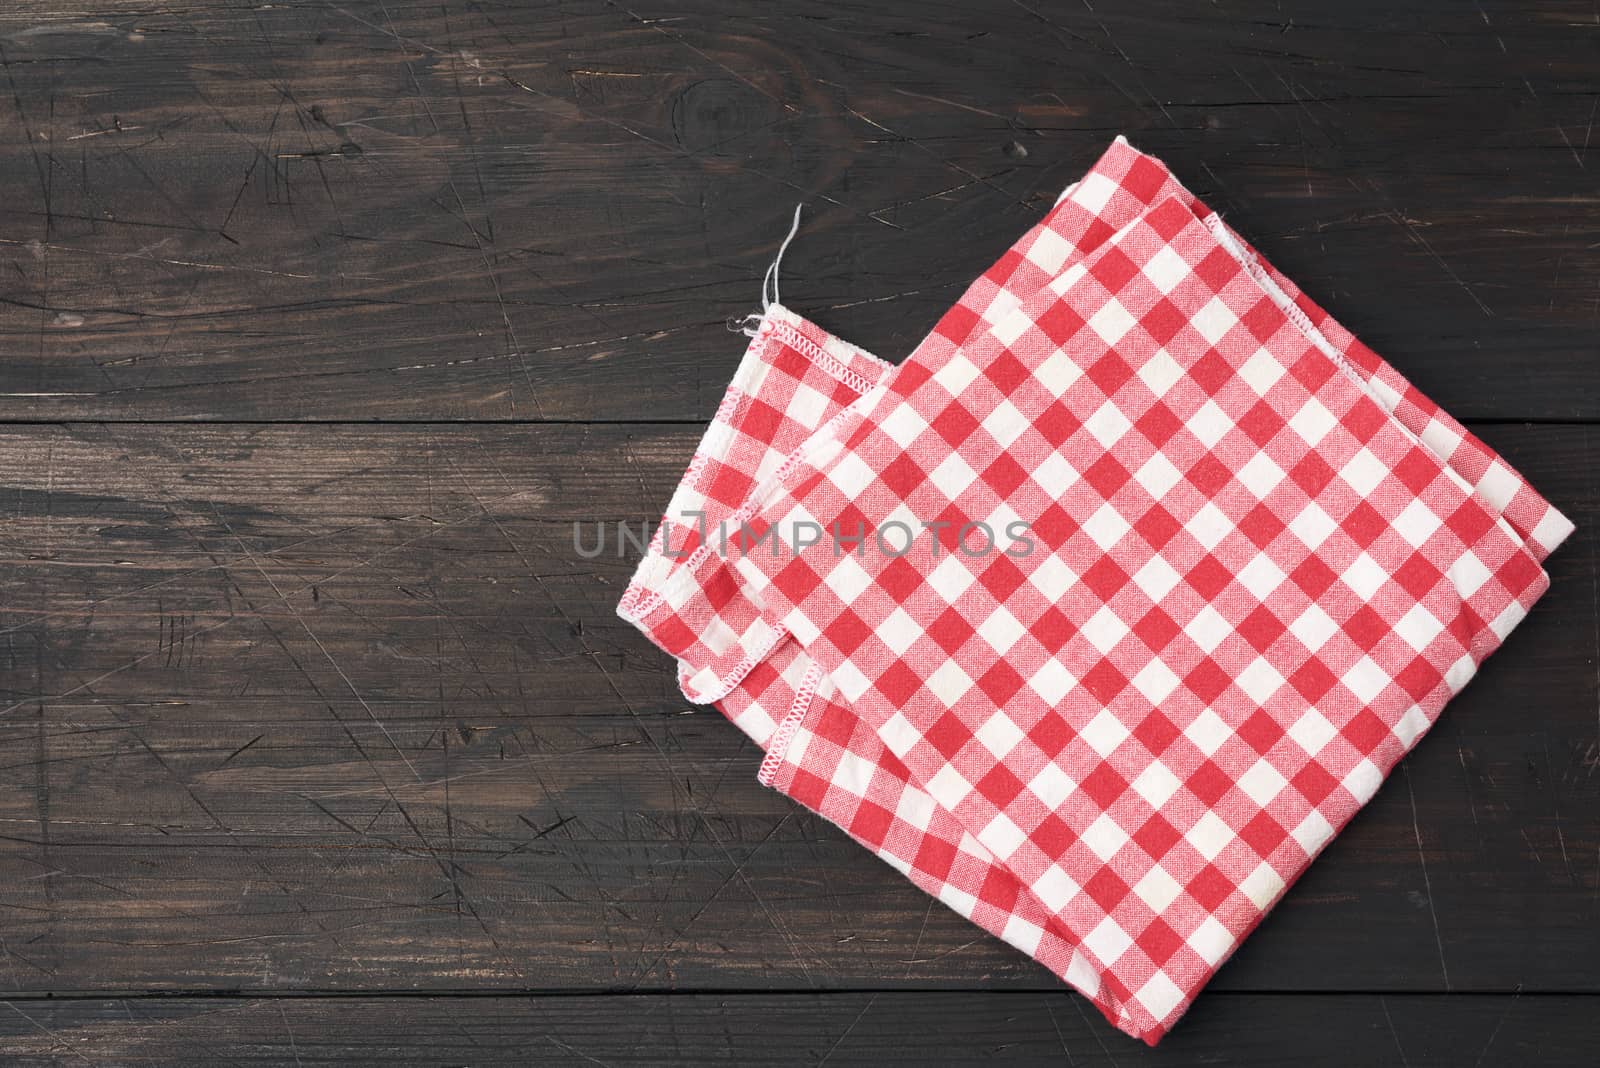 red-white textile kitchen towel on a brown wooden background fro by ndanko